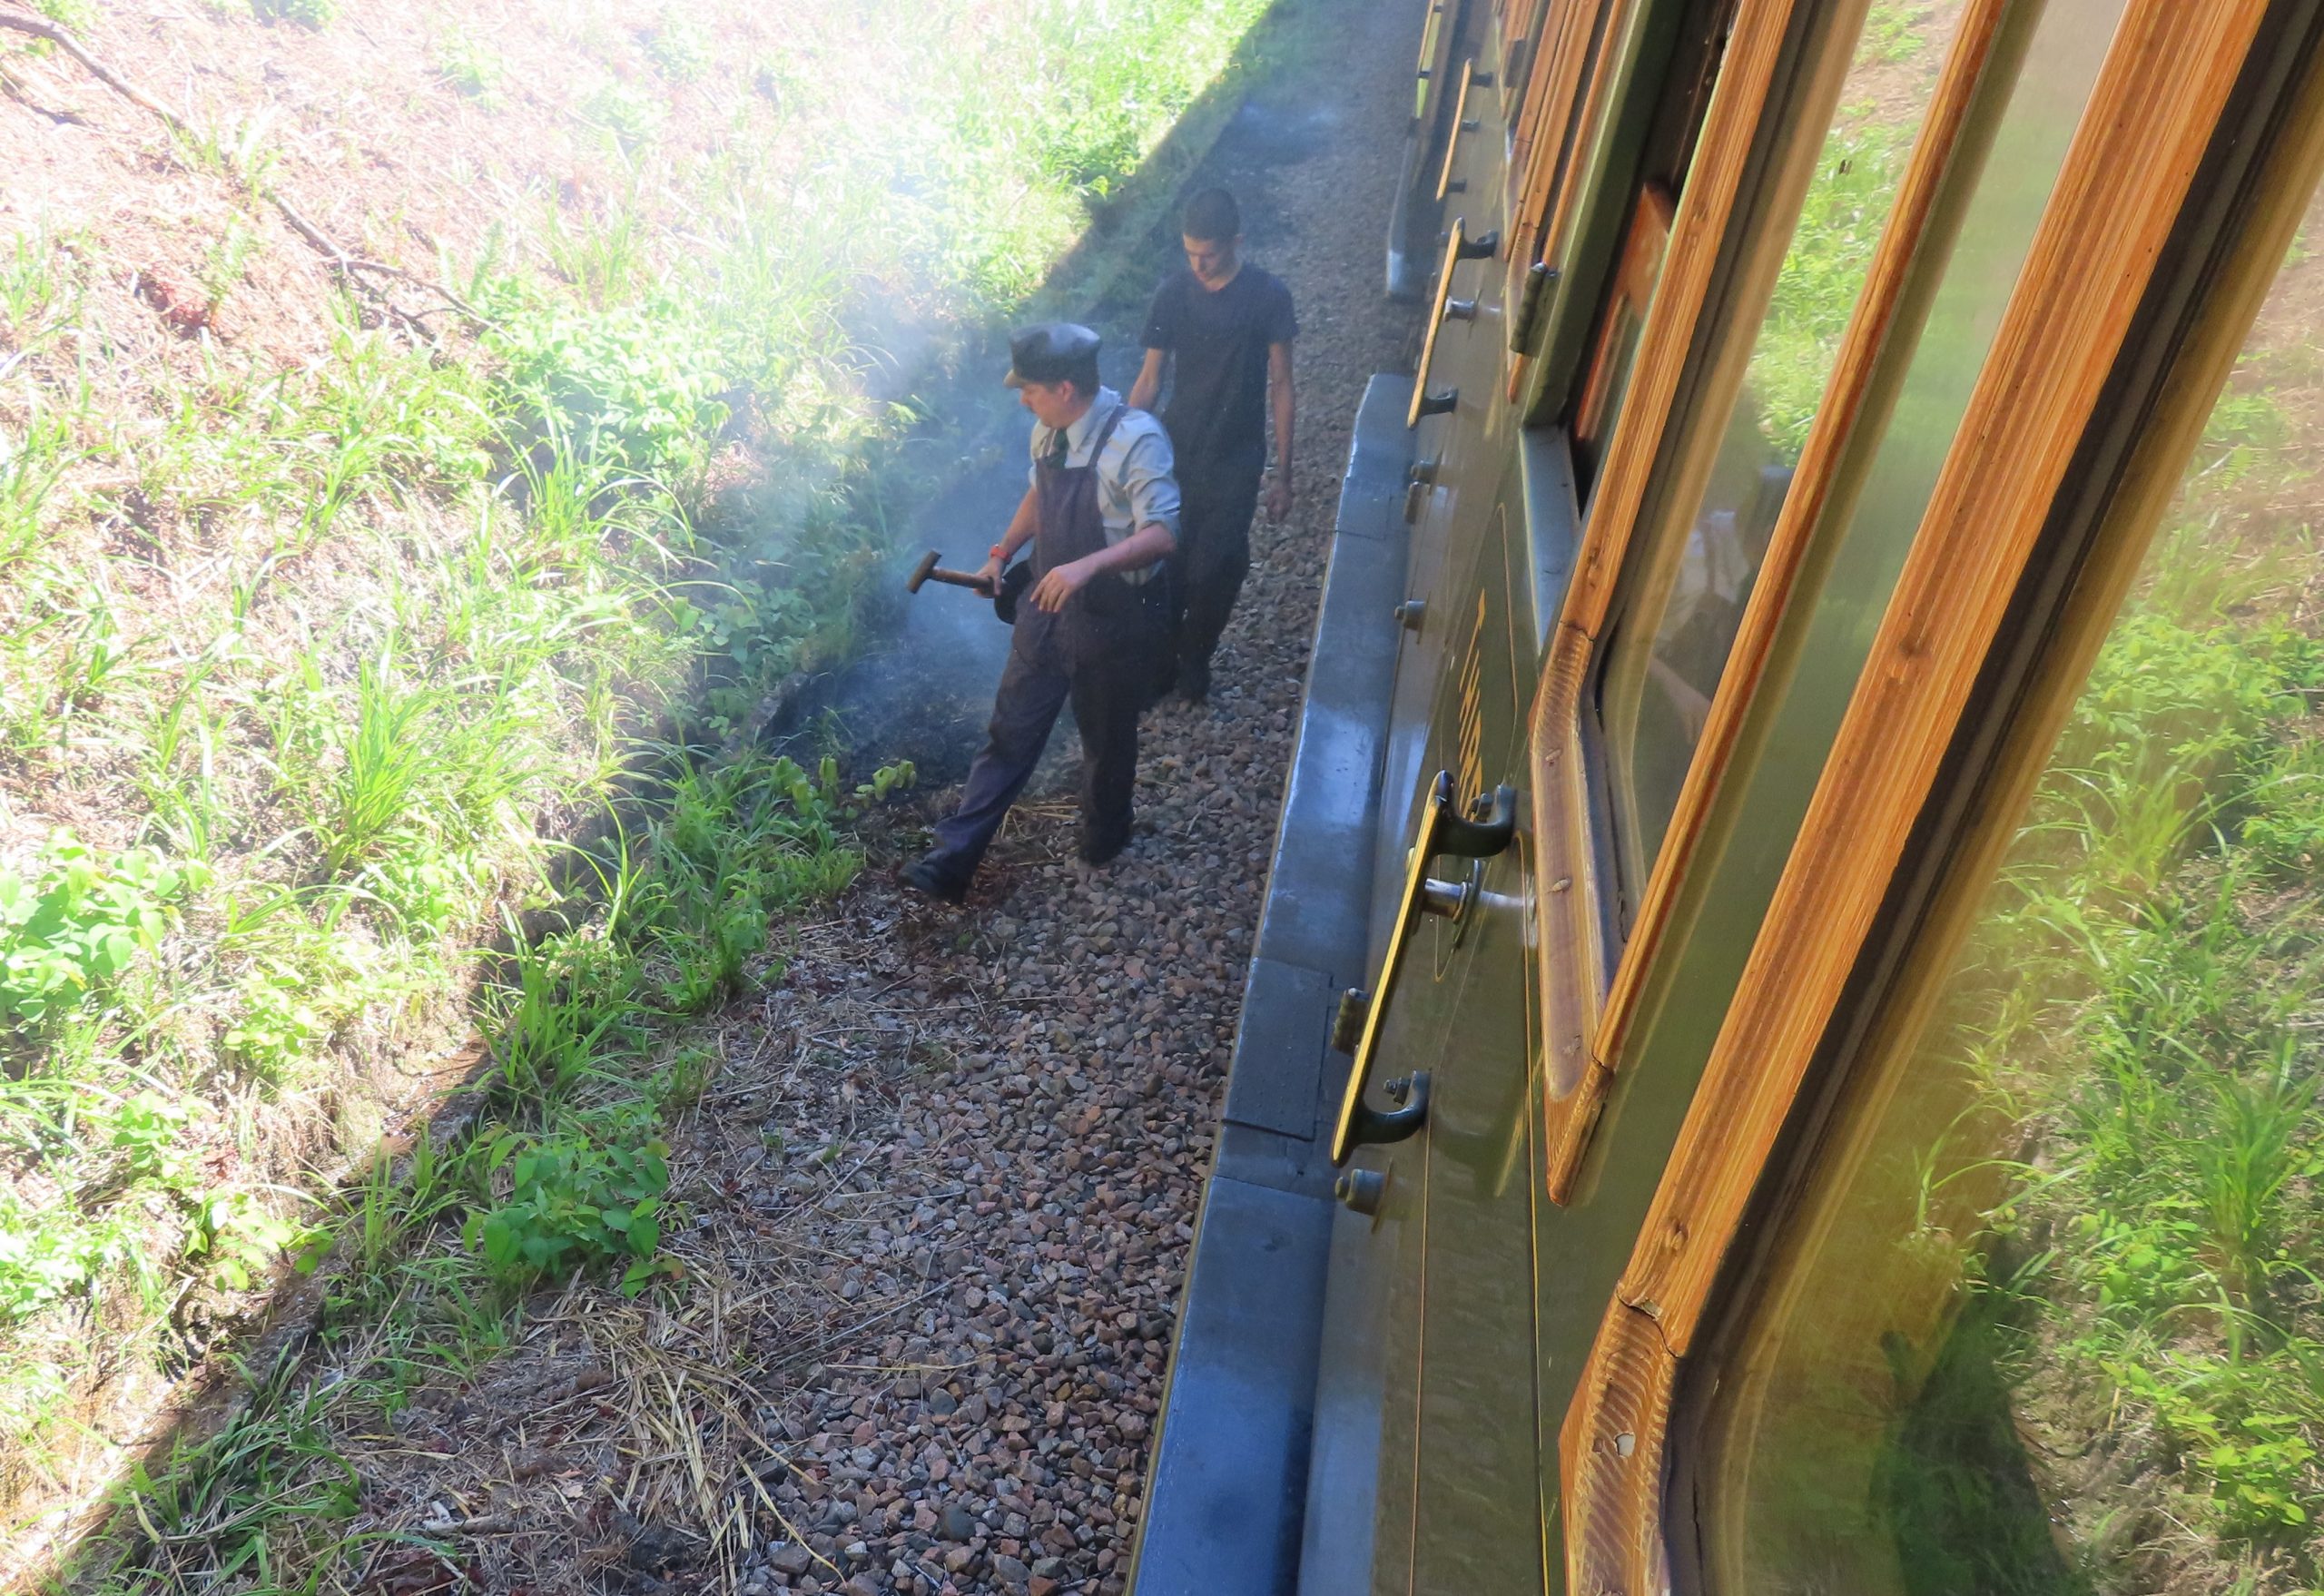 The crew finish putting out a lineside fire after bringing the train to a sudden stop just north of Horsted Keynes : Image Credit - Peter Young.